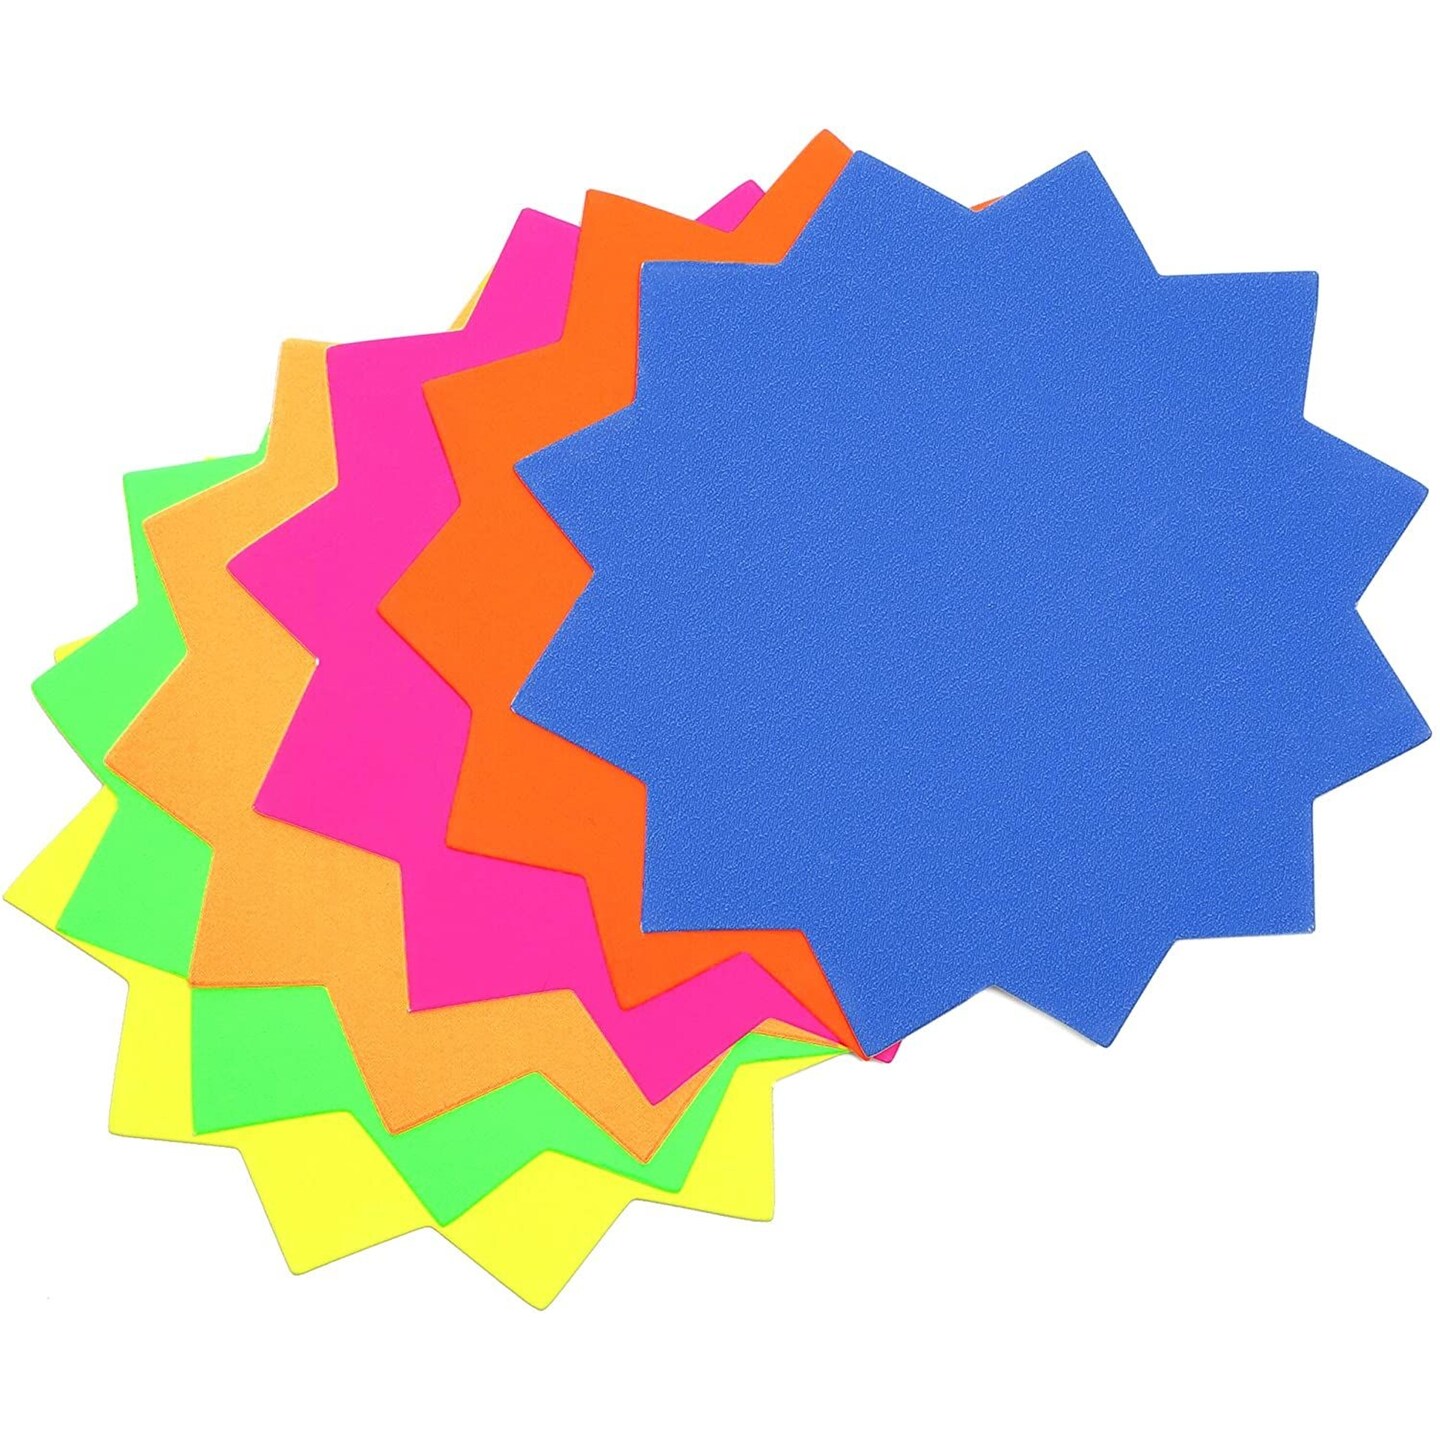 120 Pack Blank Starburst Signs for Retail, Bulletin Cutouts, Classroom Tags, 6 Colors (4 x 4 In)